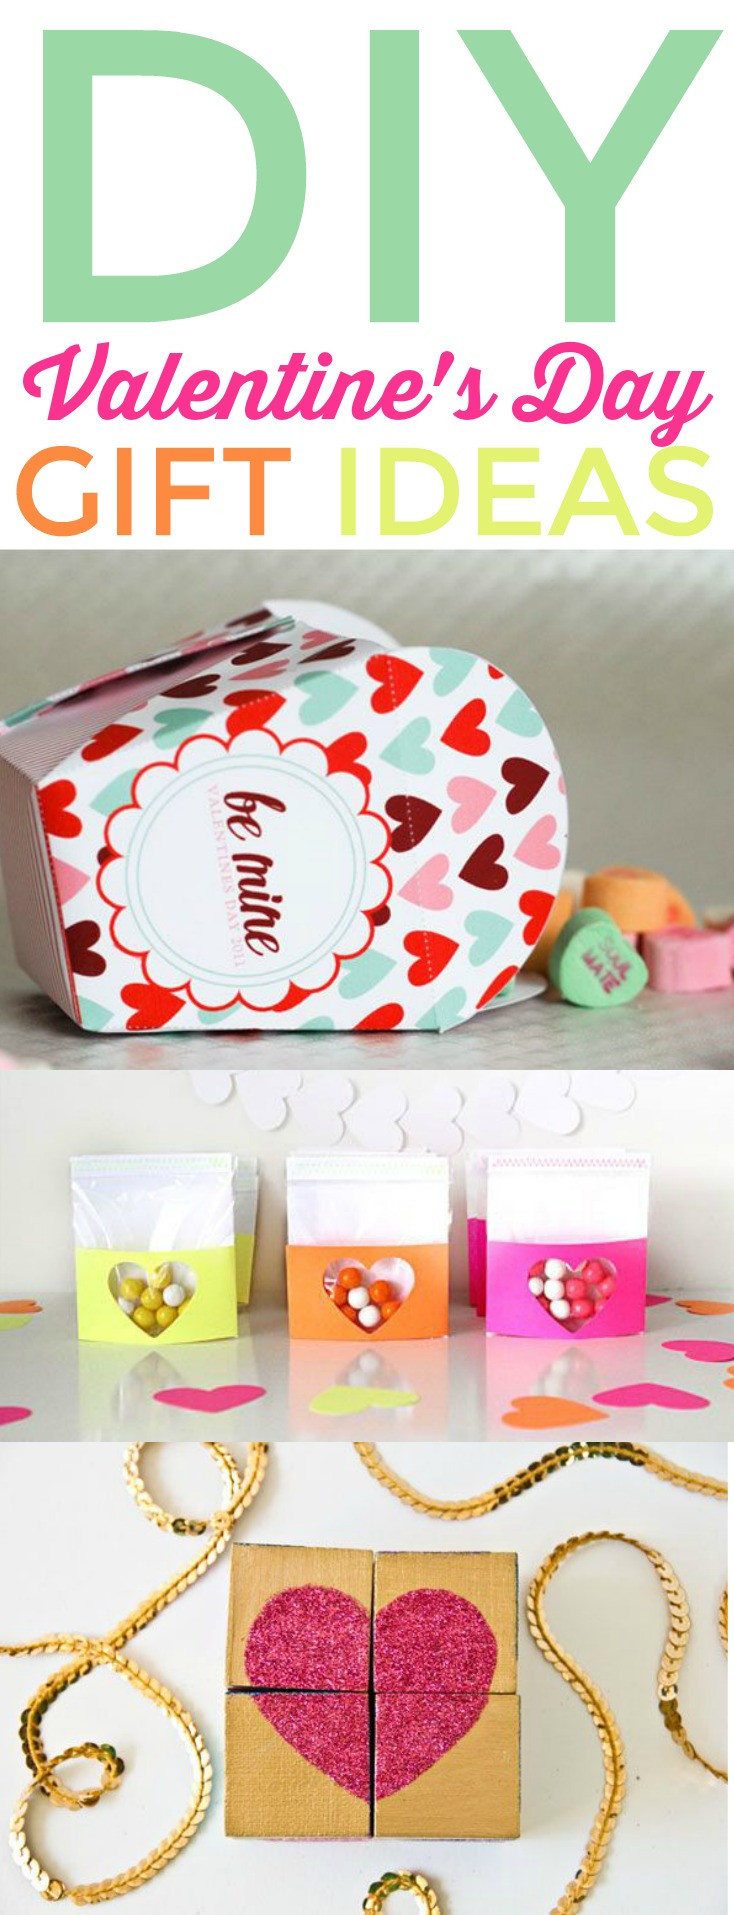 Valentine'S Day Creative Gift Ideas
 DIY Valentines Day Gift Ideas A Little Craft In Your Day